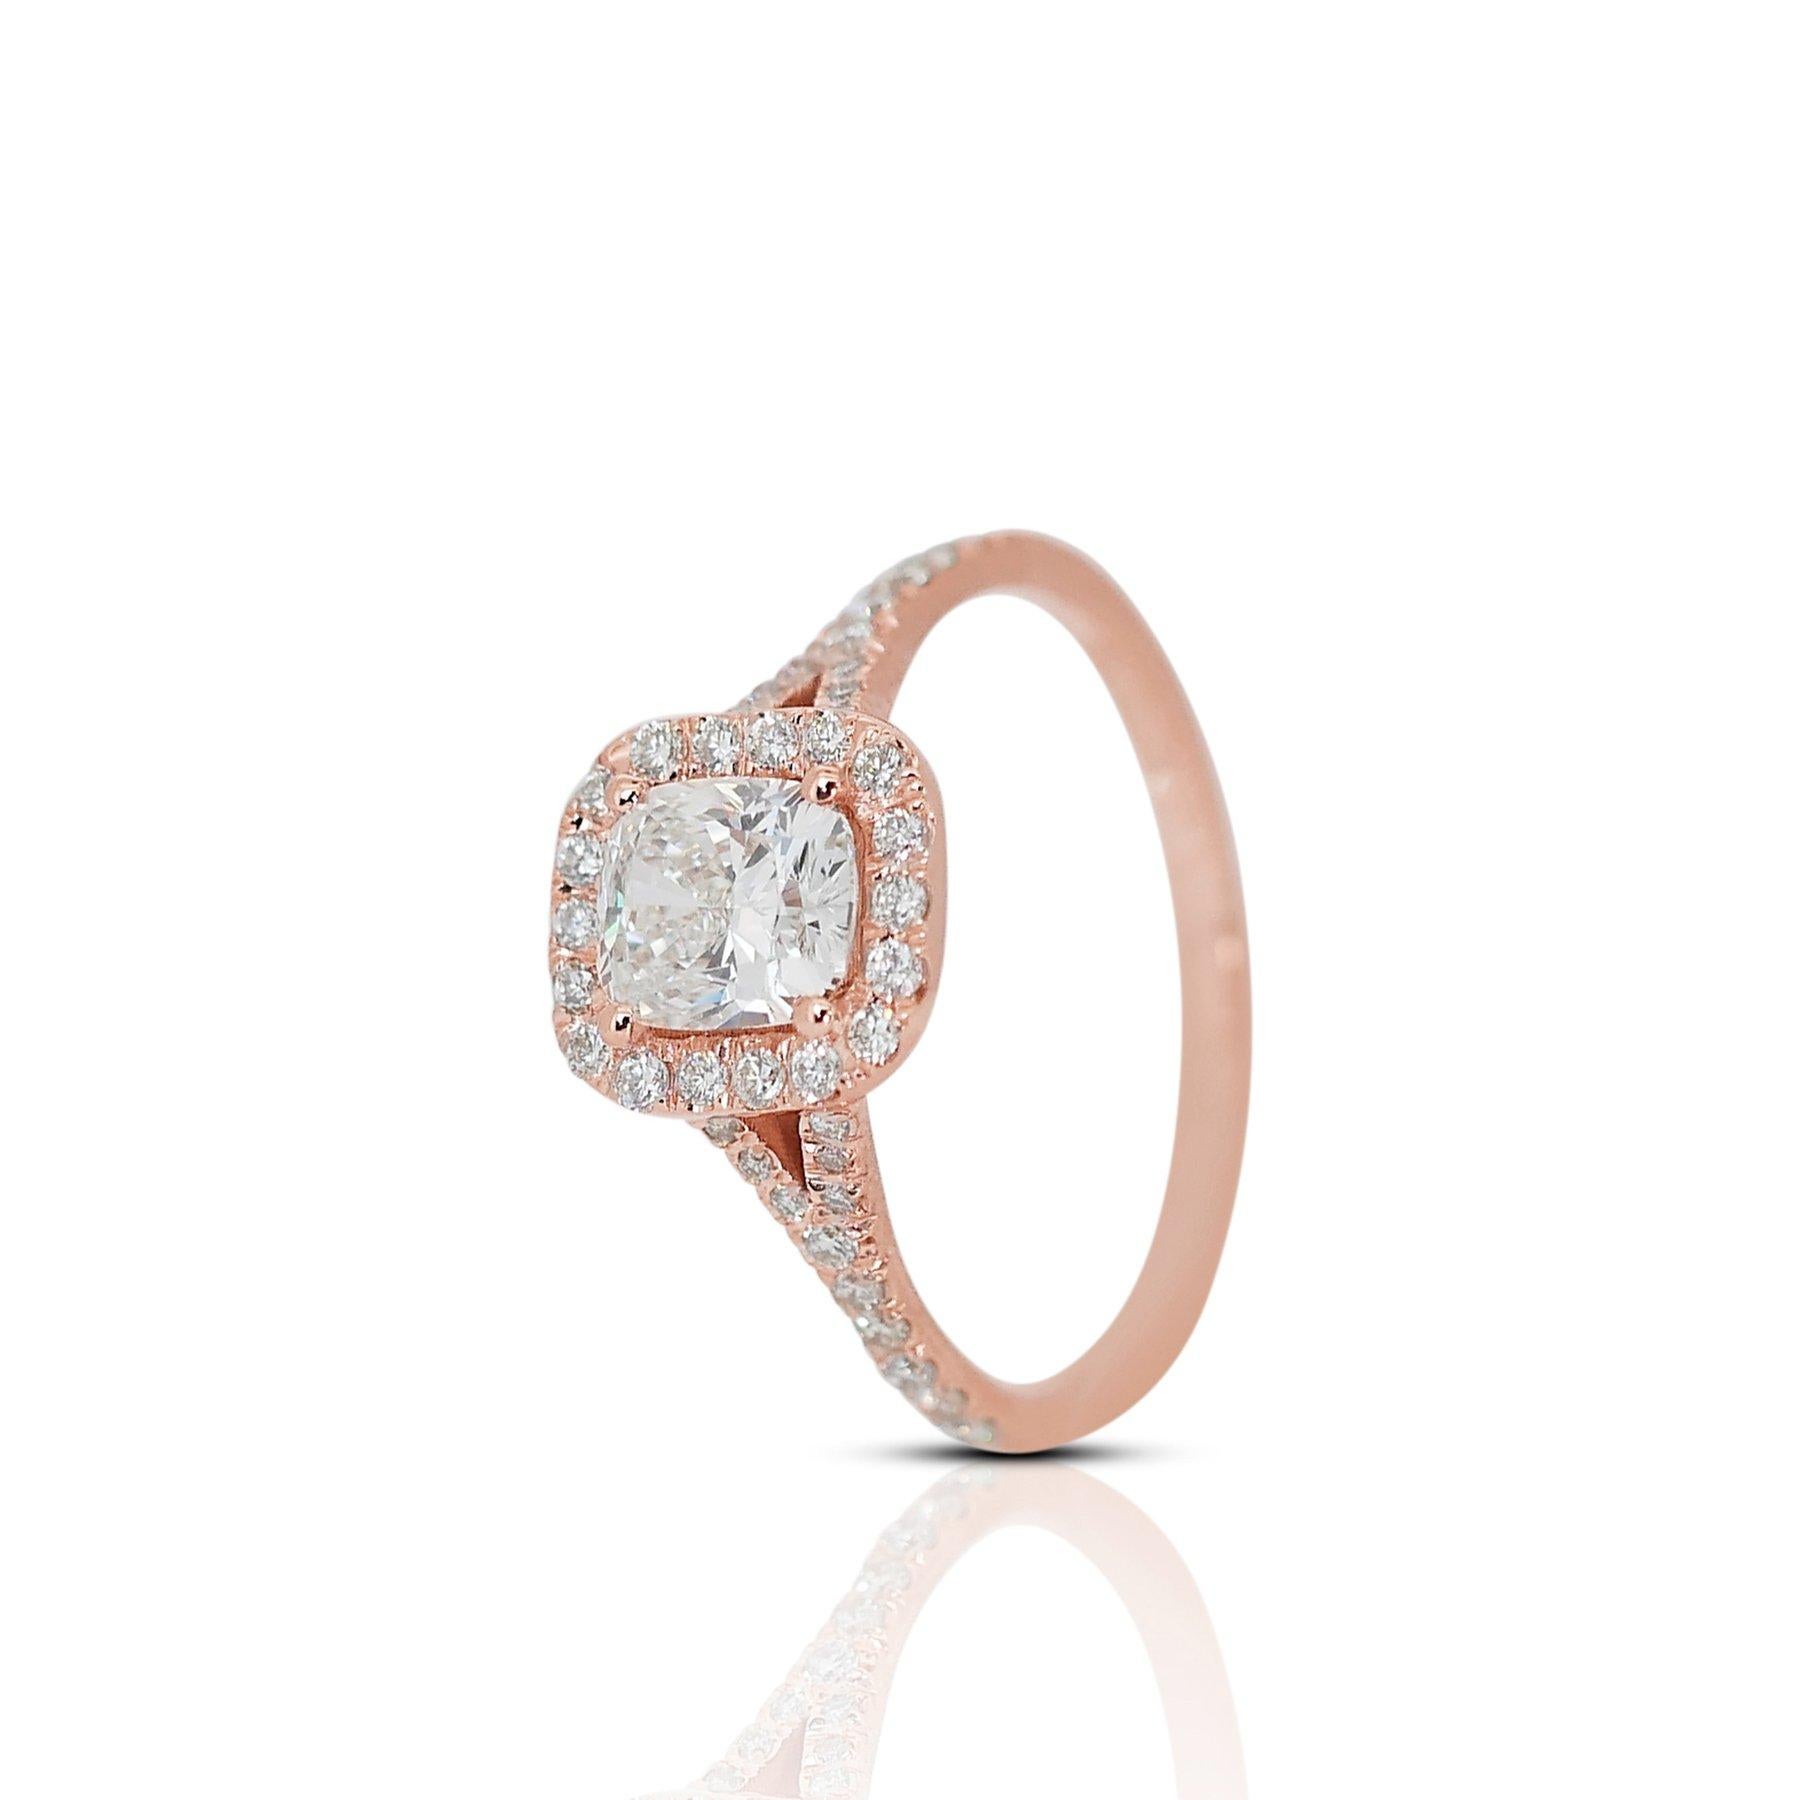 Cushion Cut Elegant 1.28ct Diamond Halo Ring in 18k Rose Gold – GIA Certified For Sale